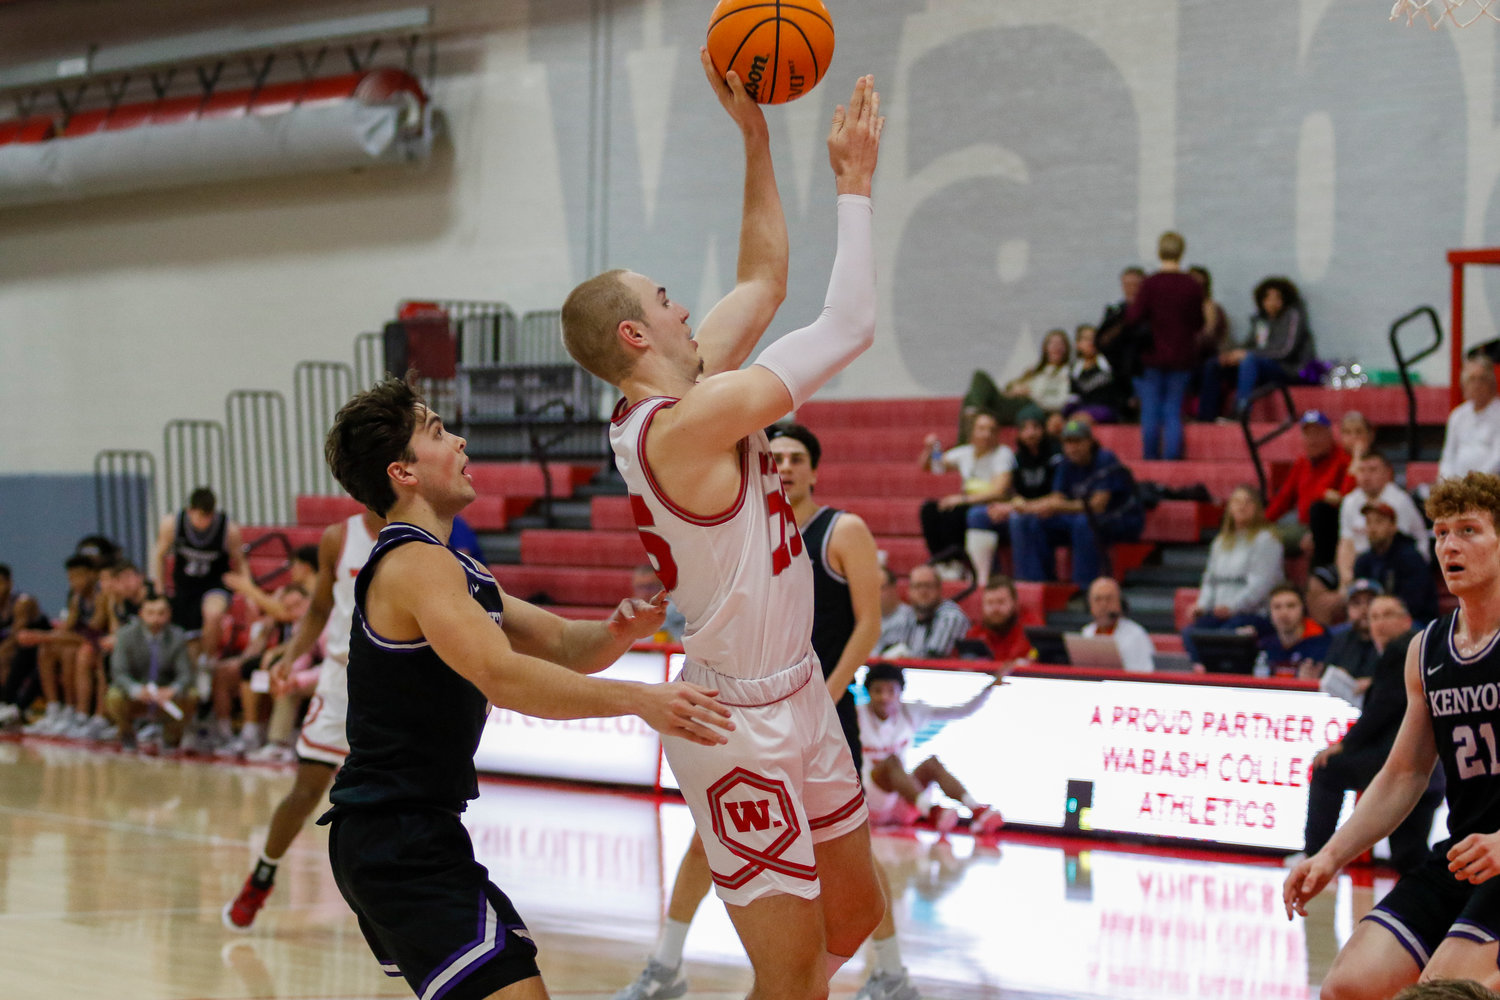 Champ McCorkle played a huge role for Wabash in their 74-69 win over Kenyon on Saturday as the junior scored 16 points on a perfect 6-6 from the floor.